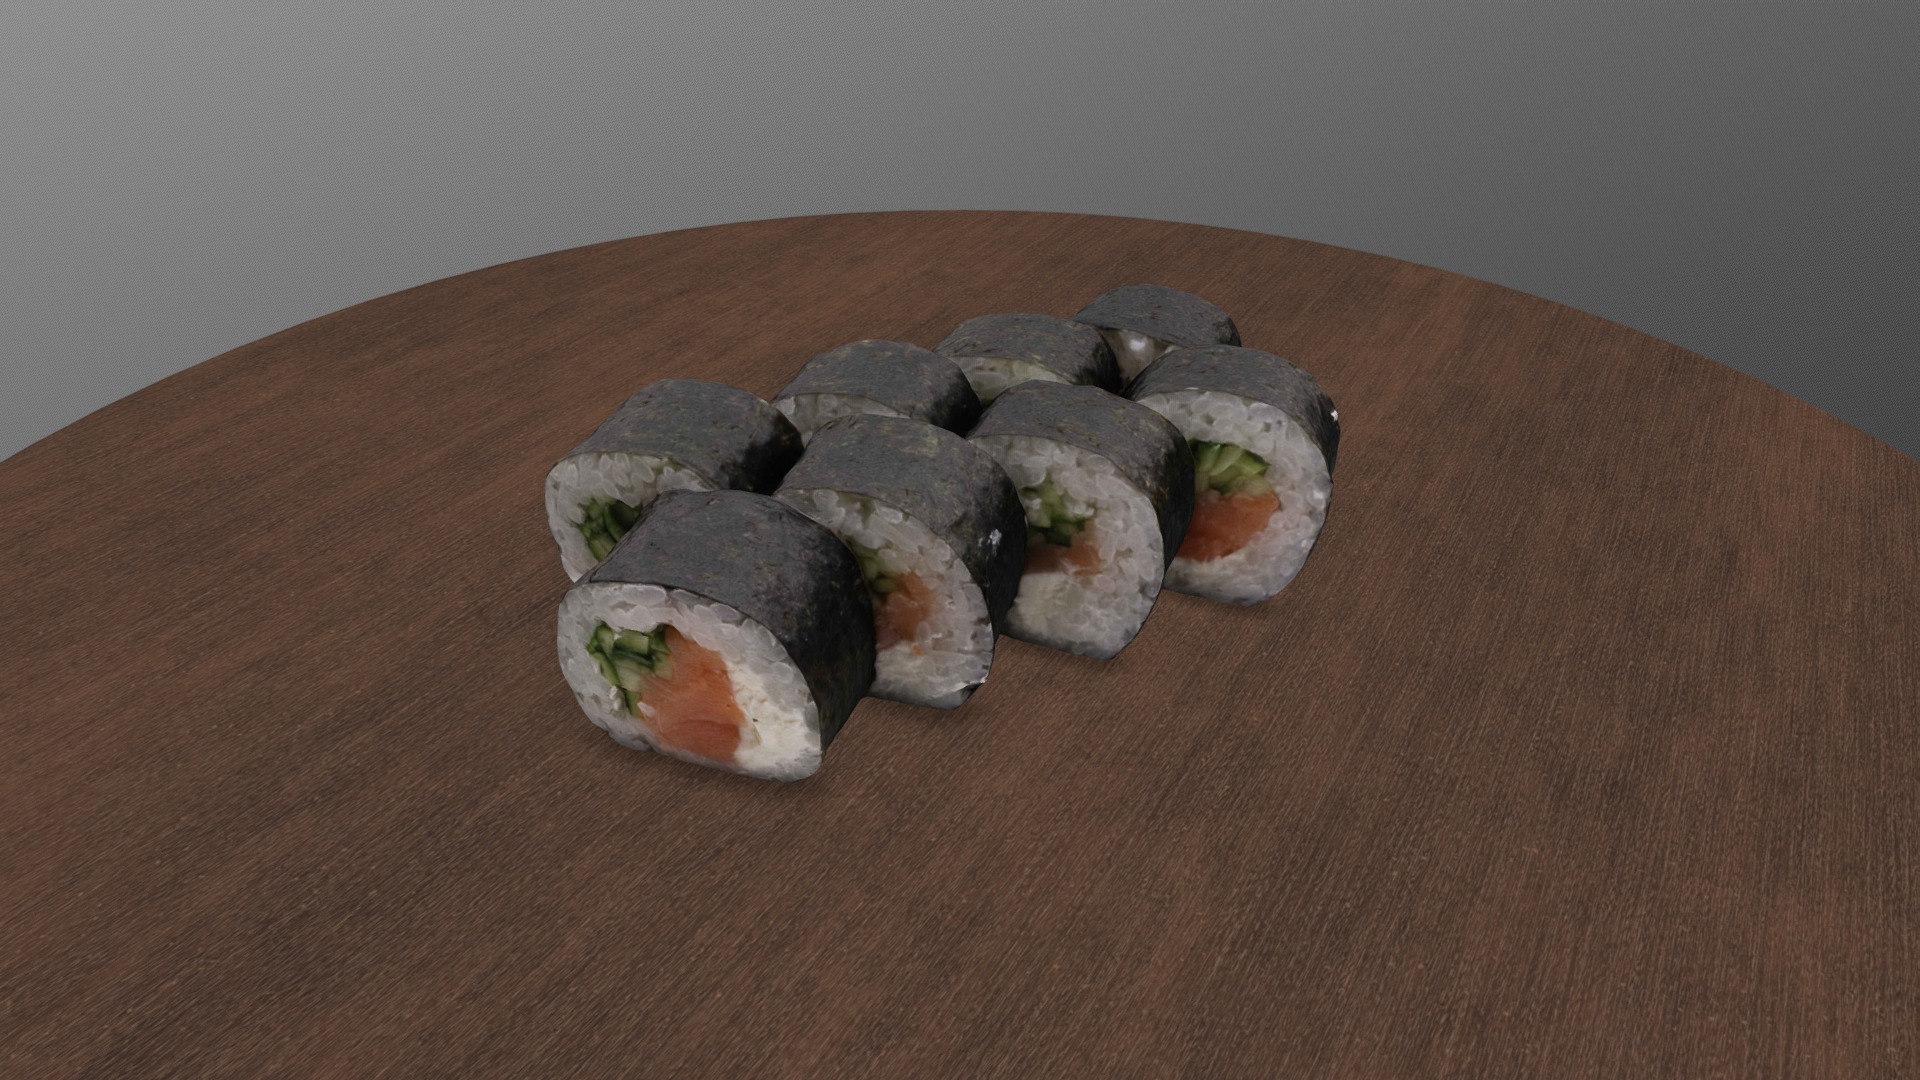 3D model 17Crabs - This is a 3D model of the 17Crabs. The 3D model is about a group of sushi on a wooden surface.